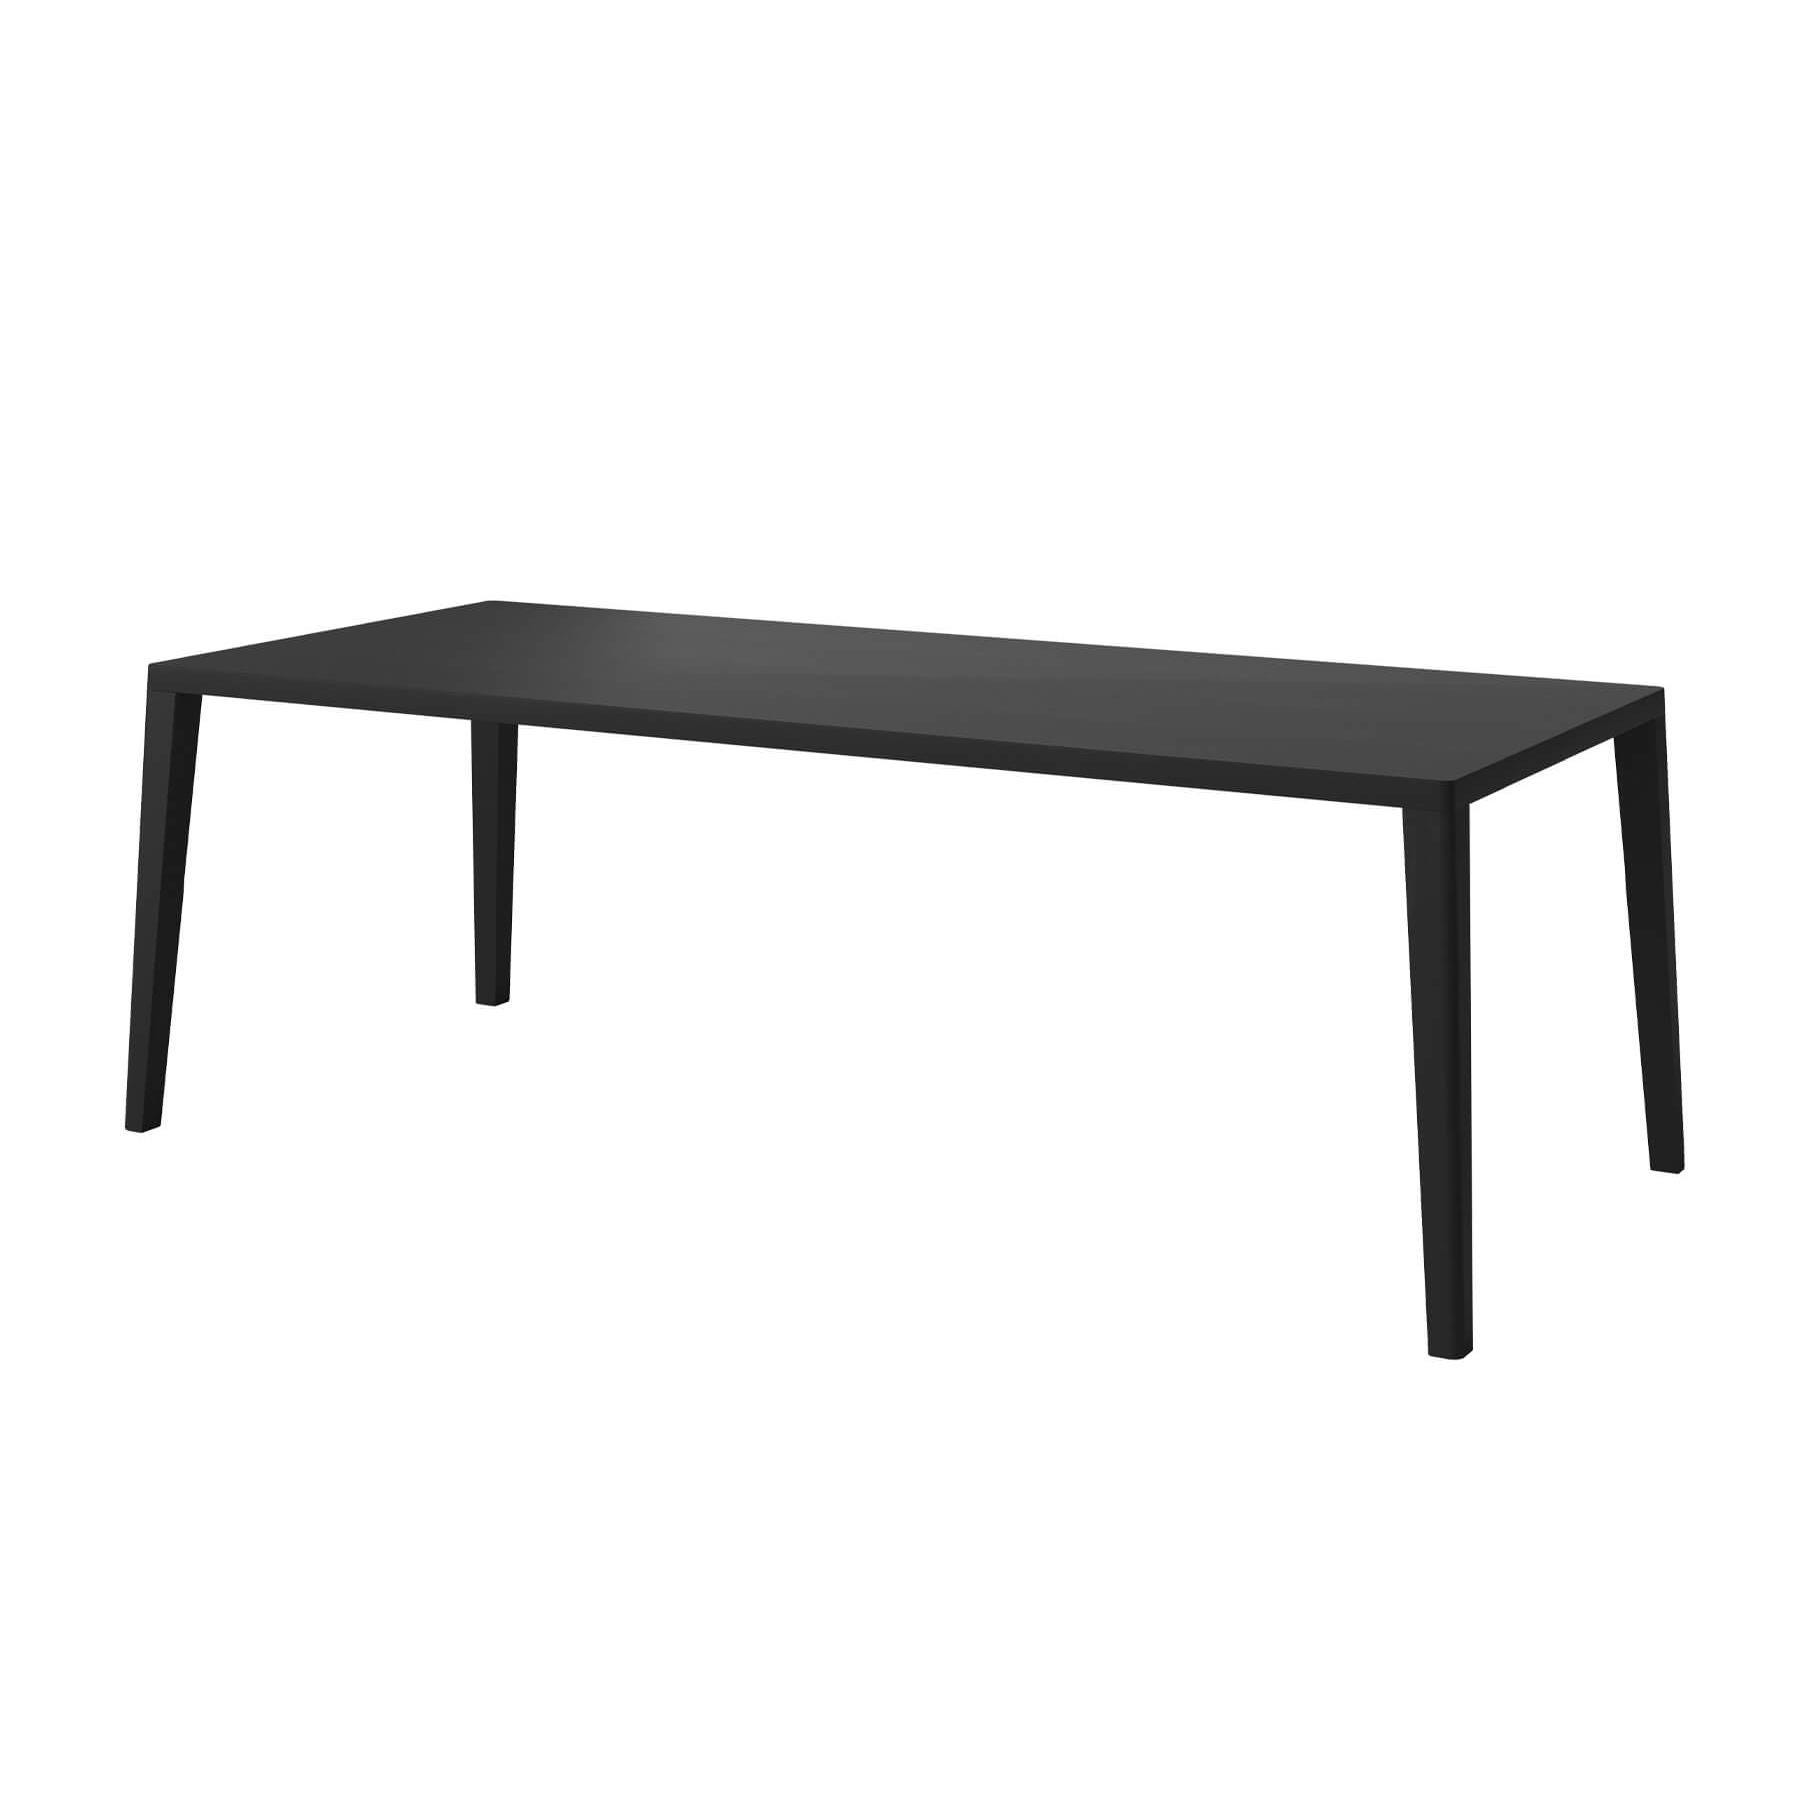 Bolia Graceful Dining Table 220 X 95cm Black Stained With Extension Leaves Designer Furniture From Holloways Of Ludlow